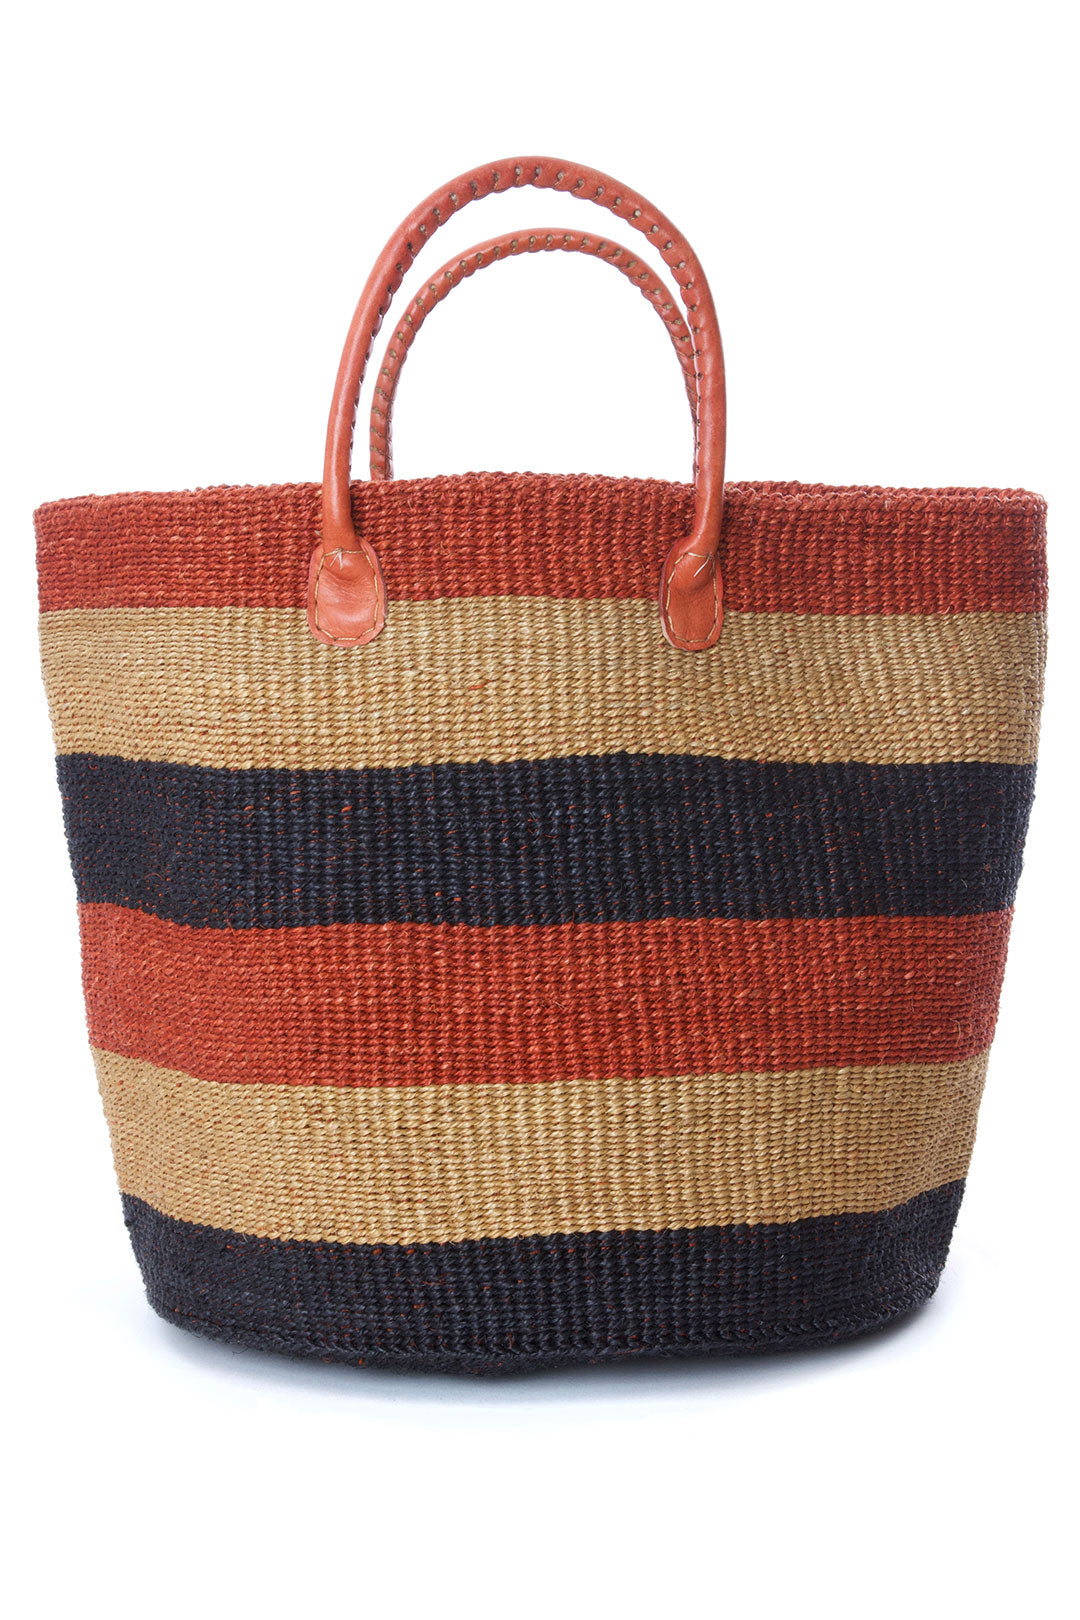 Brick, Sand & Onyx Strata Tote with Leather Handles